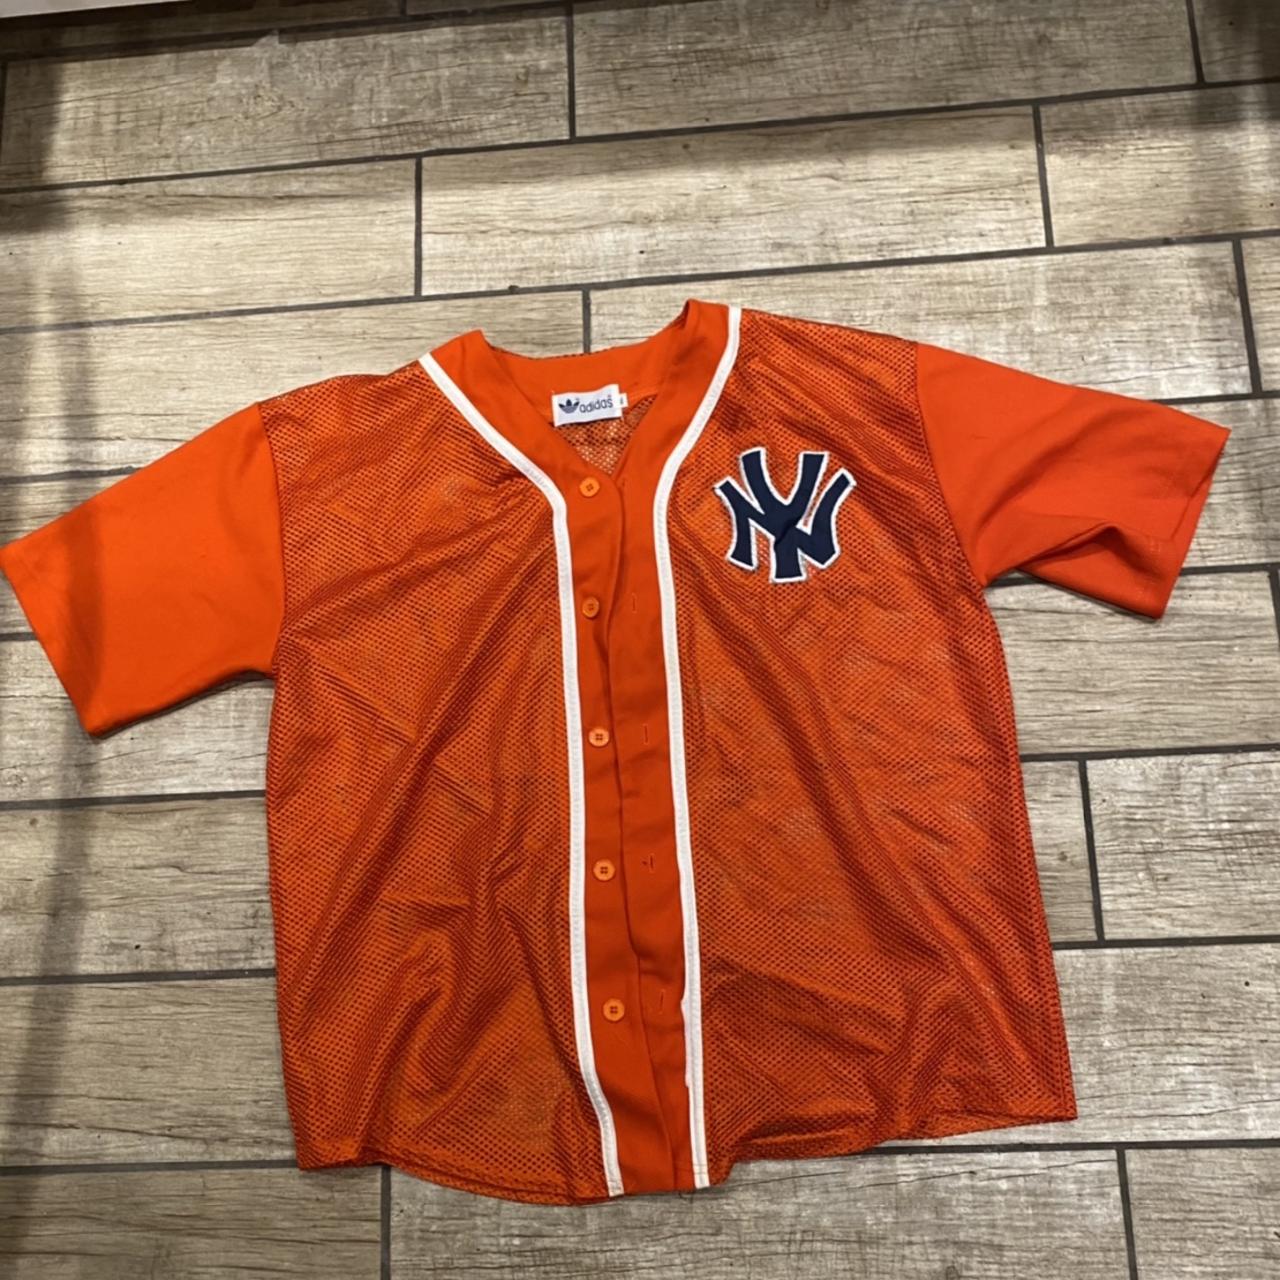 Authentic New York Yankees adidas jersey , This